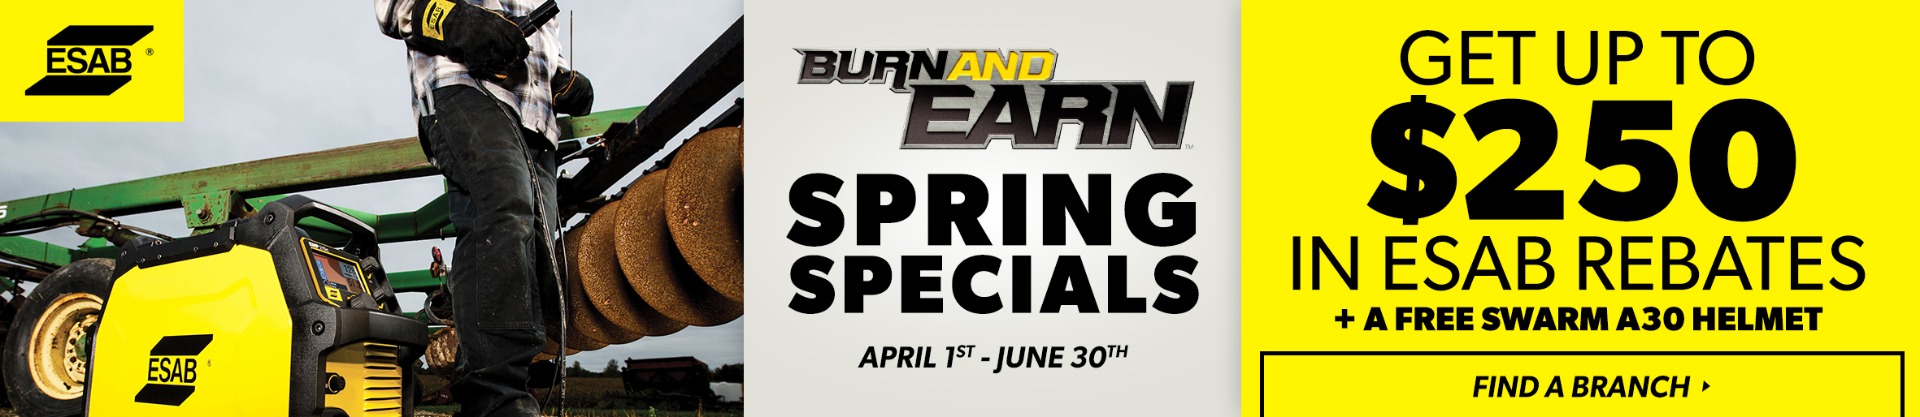 ESAB Burn and Earn Winter Promotion